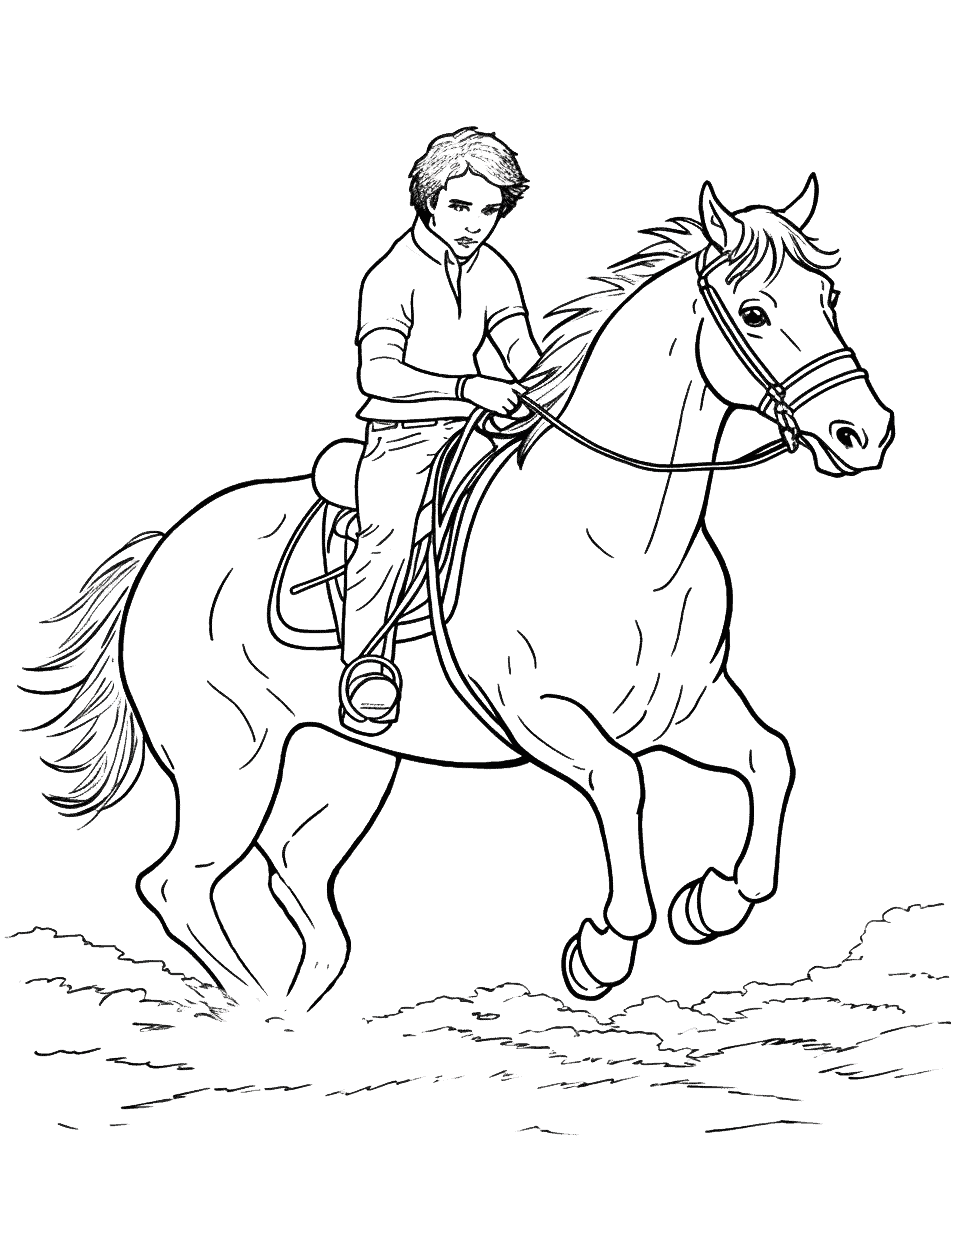 Rodeo Bull Riding Coloring Page - A thrilling rodeo scene with a cowboy trying to stay on a bucking bronco.